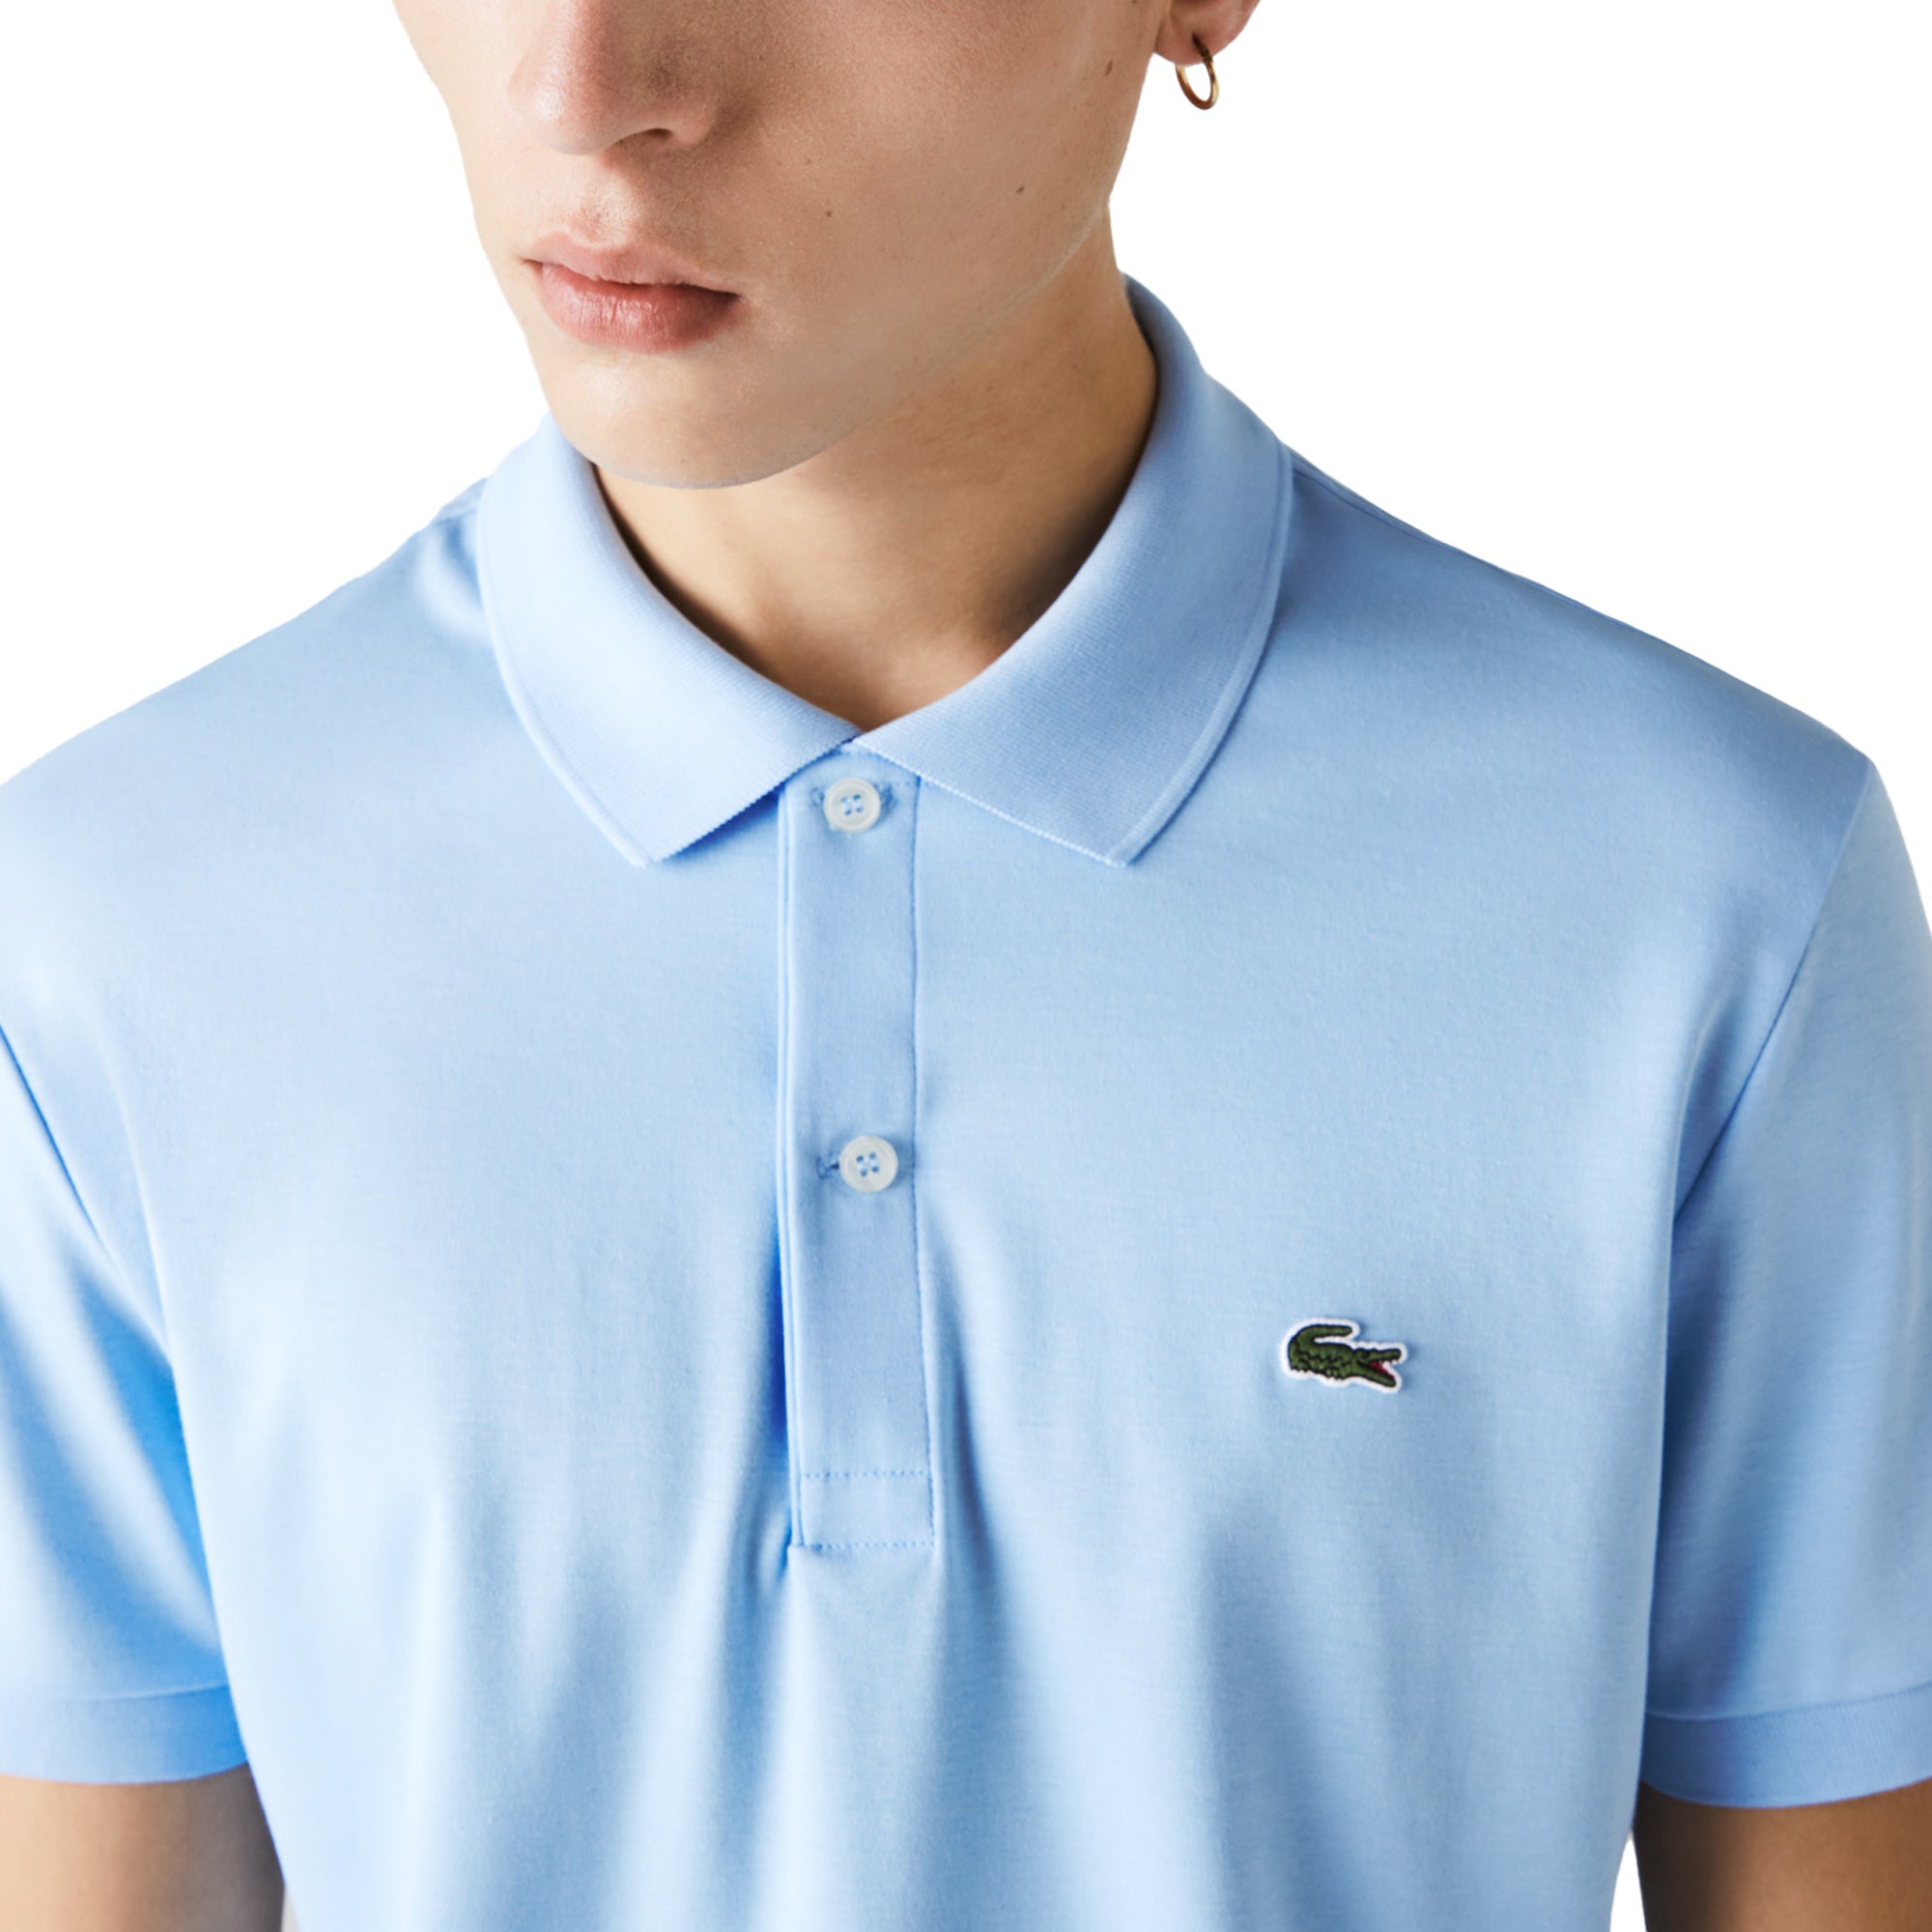 Lacoste Stretch Jersey DH2050 Polo - Sky Blue